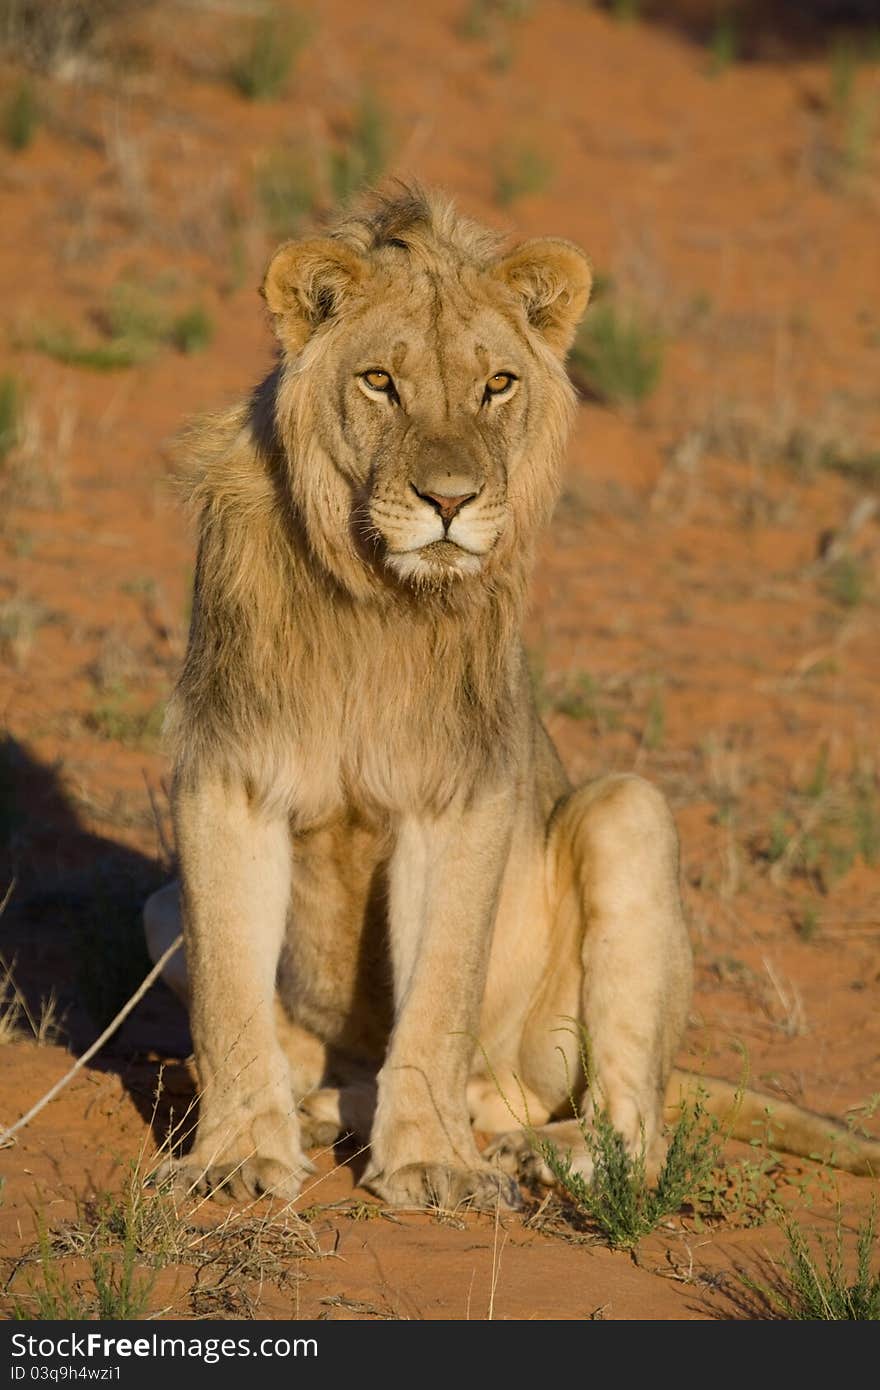 A young male lion sitting upright in beautiful golden light in the kalahari desert